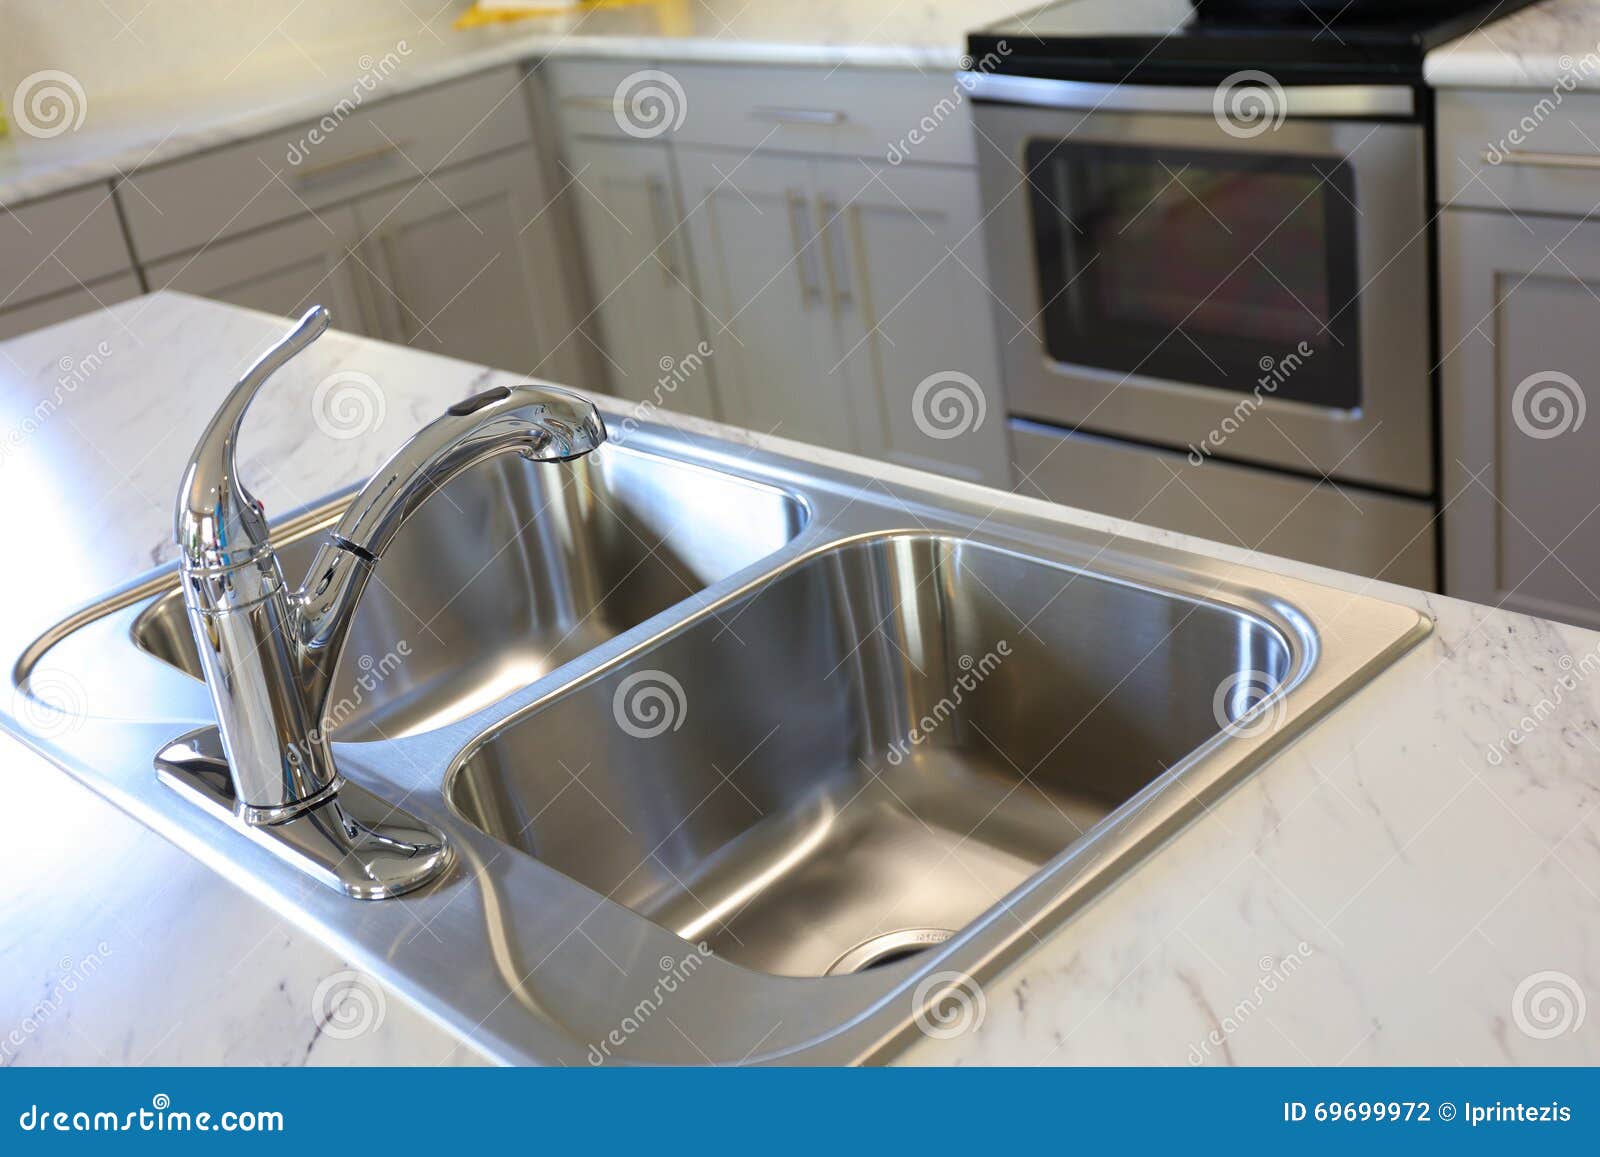 Modern Kitchen Sink stock photo. Image of furniture, home - 69699972